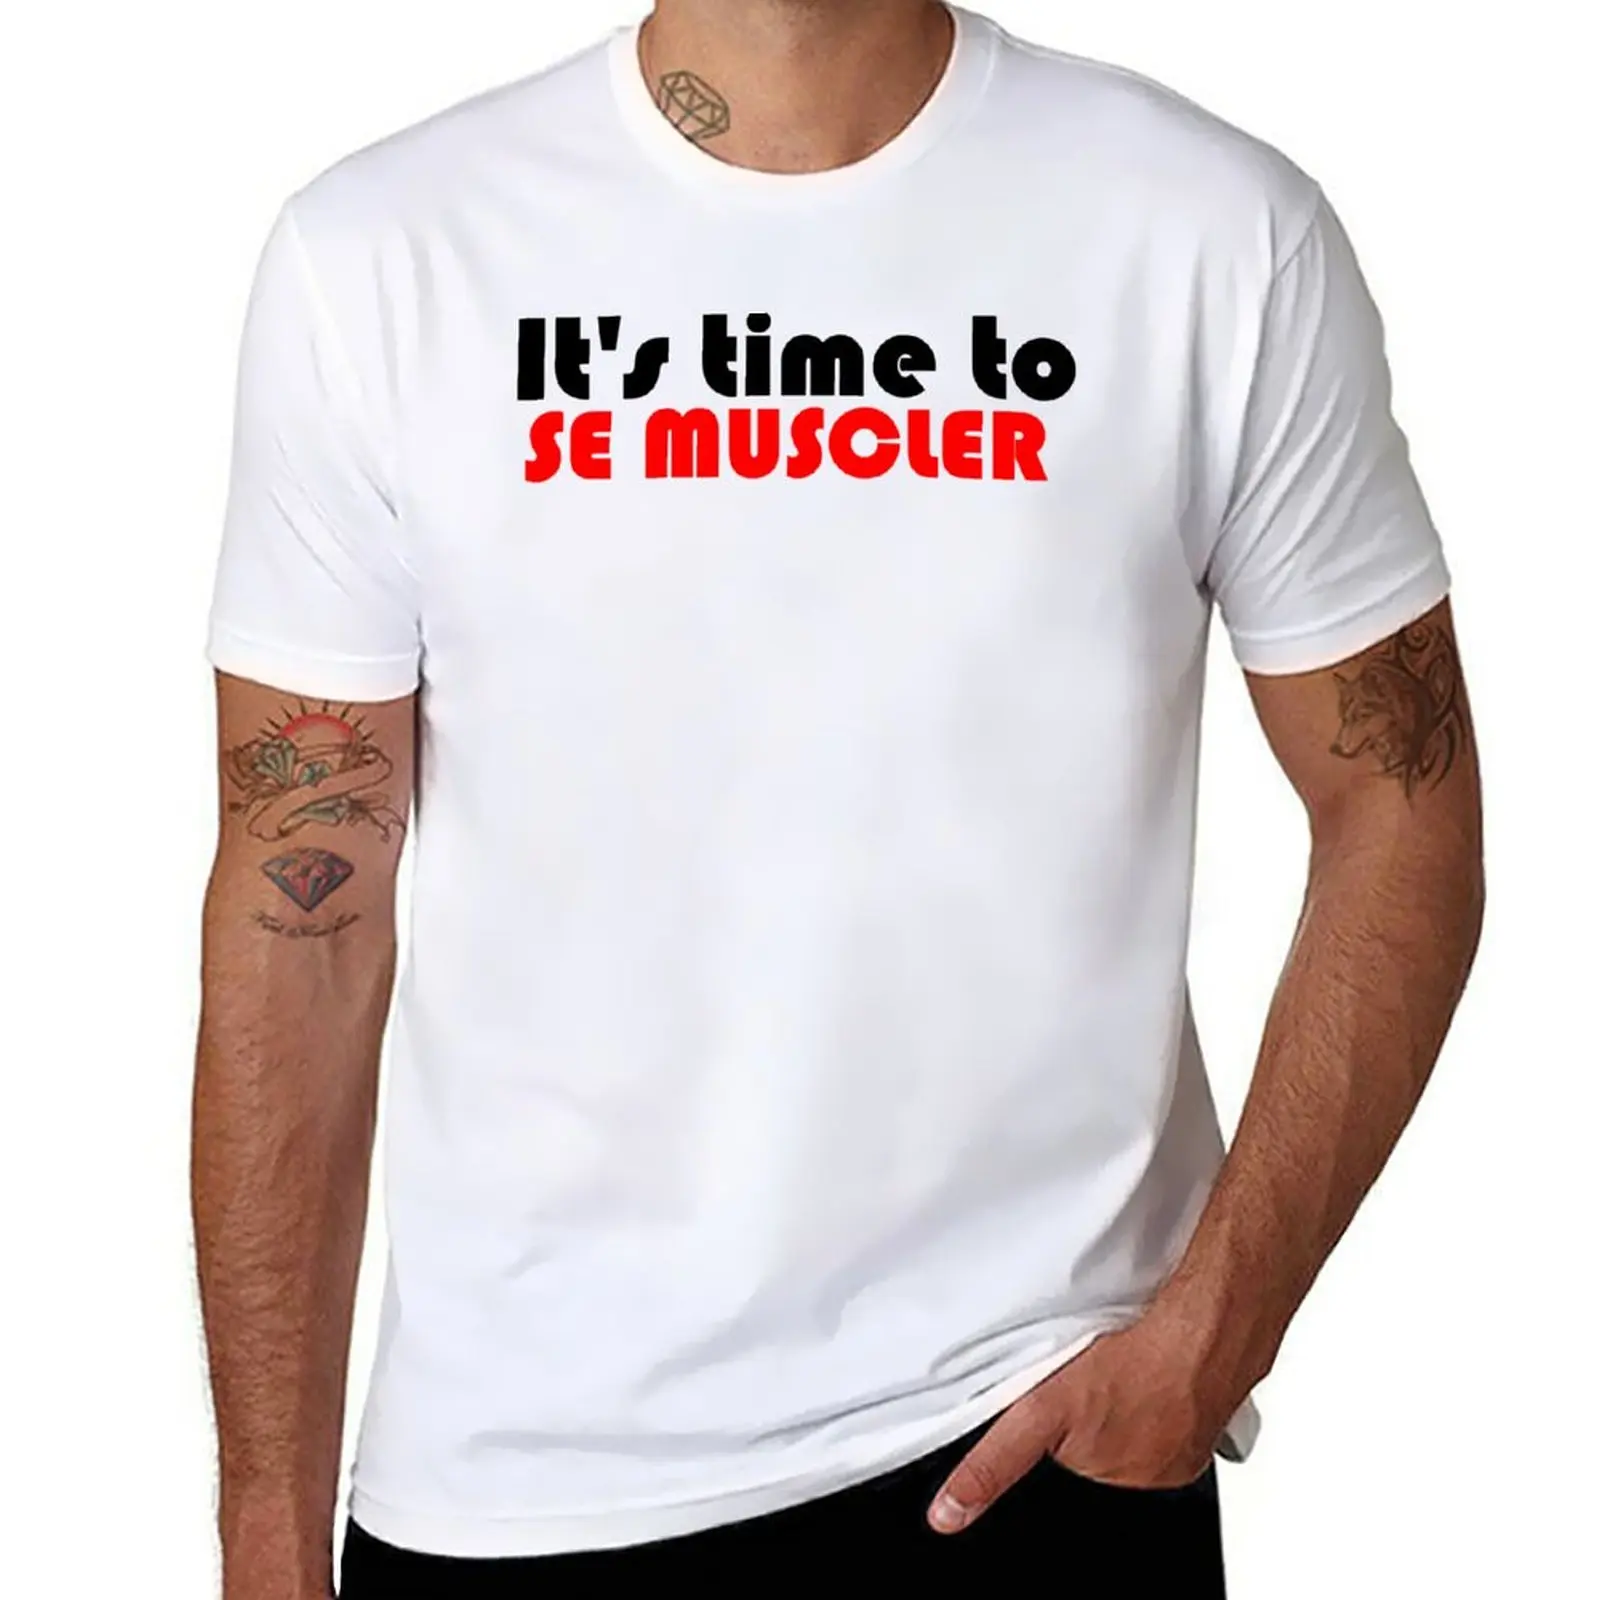 

It's time to build muscle T-Shirt boys whites graphics summer clothes mens vintage t shirts